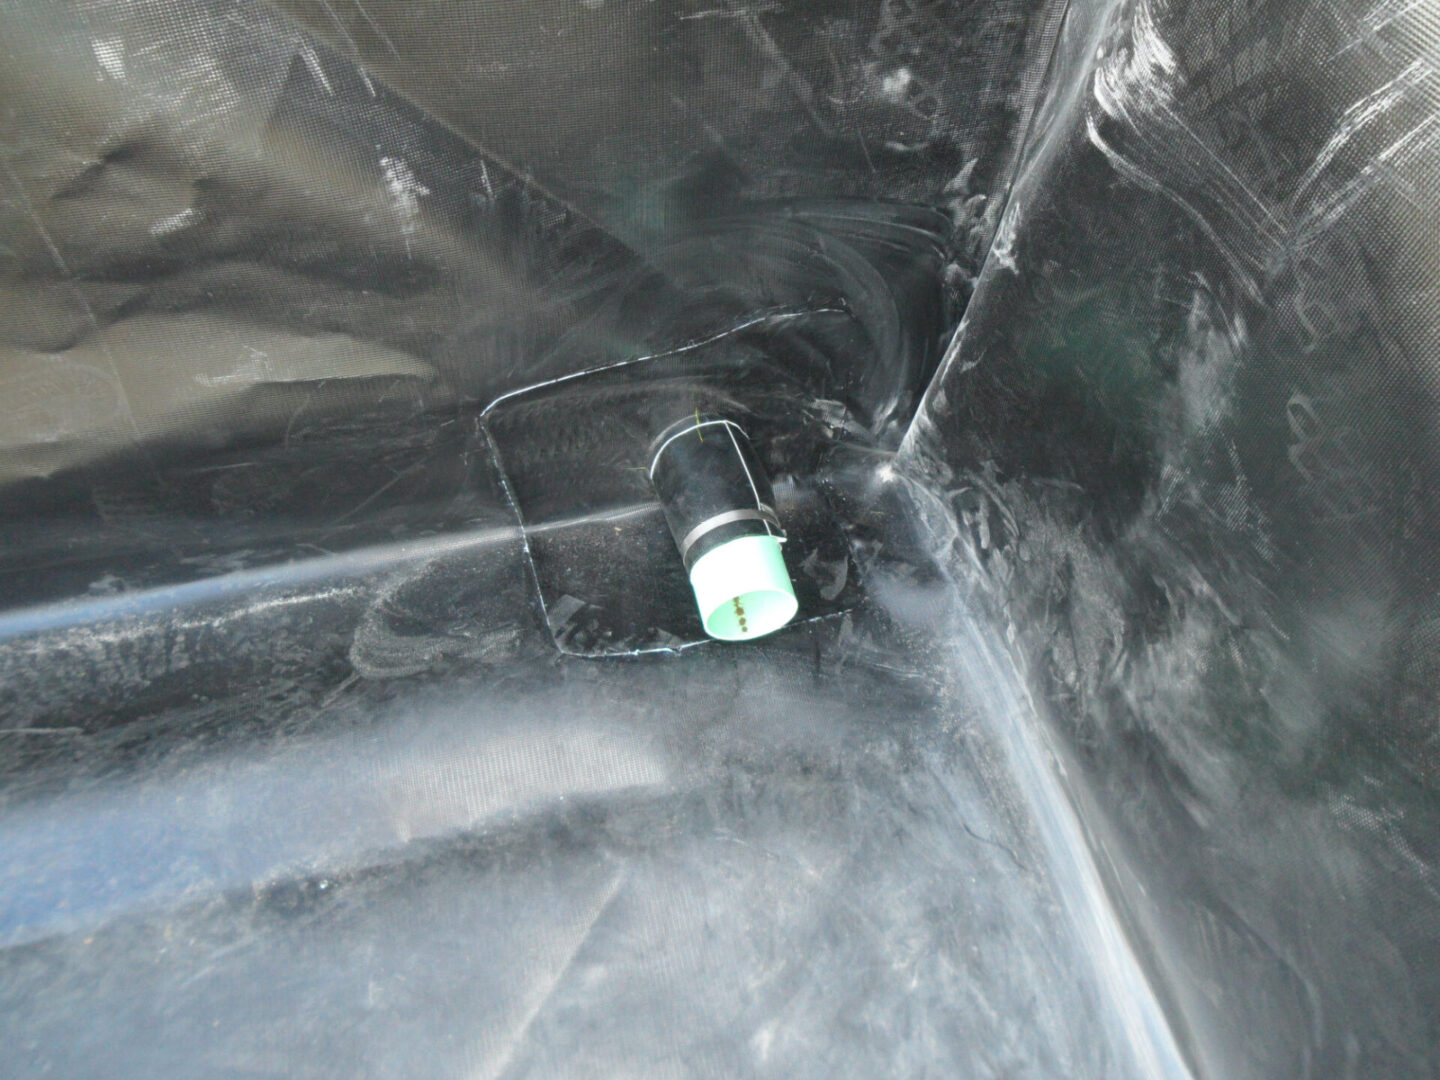 A bottle of liquid is sitting in the middle of a black plastic bag.